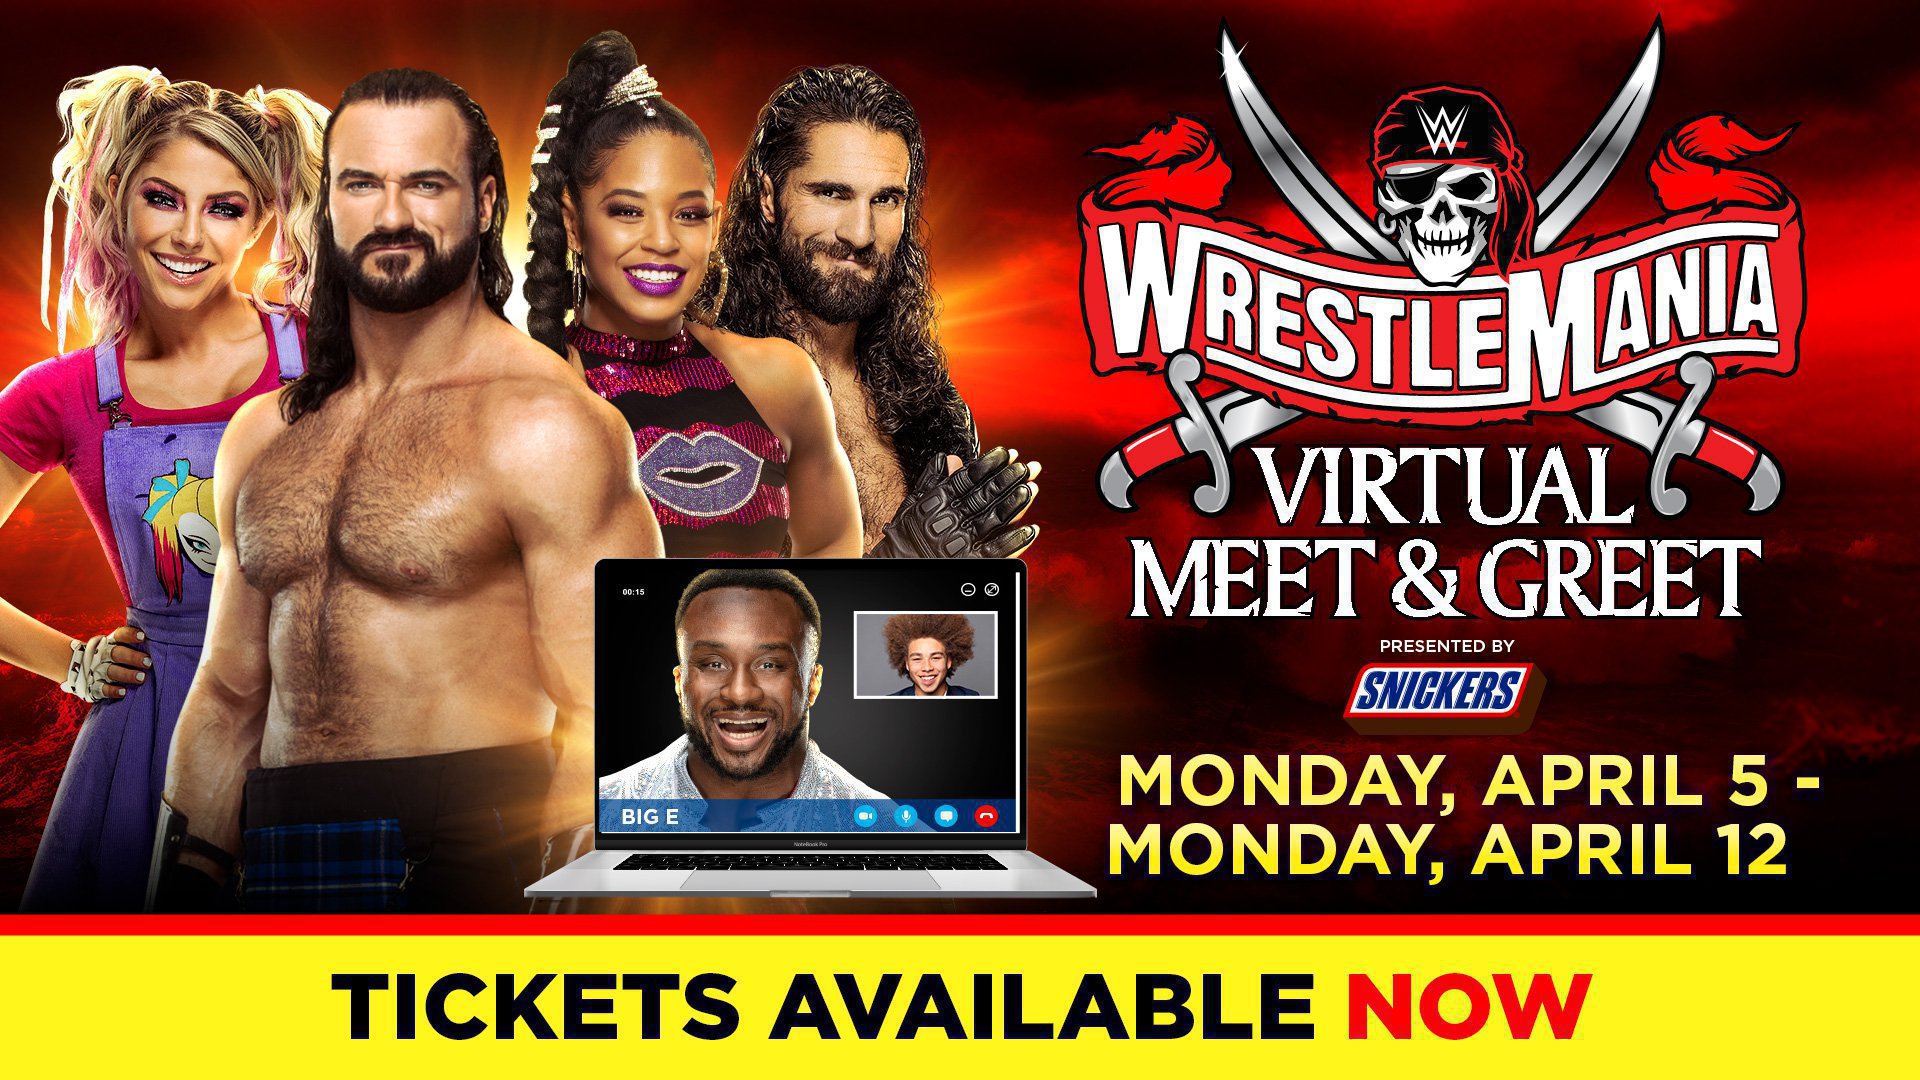 Tickets Available Now For The Largest Selection Of Wwe Virtual Meet And Greets In Wwe History